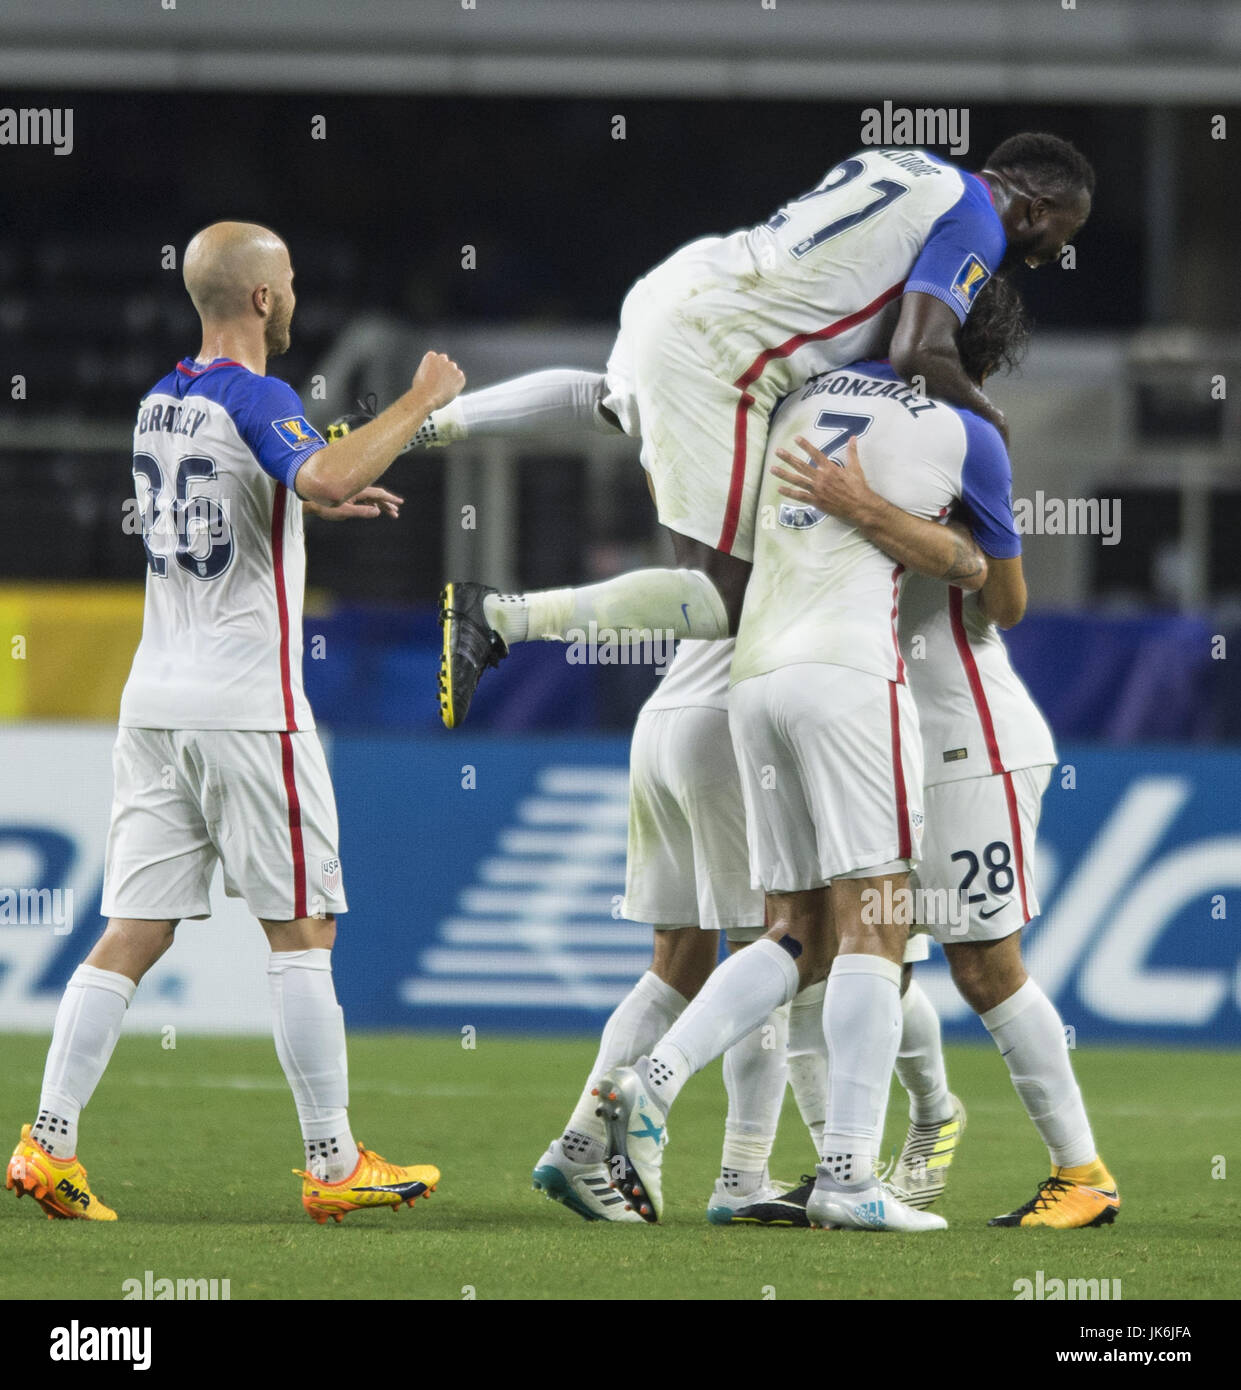 Arlington, Texas, USA. 22nd July, 2017. U.S.A. teammates congratulating #28 CLINT DEMPSEY on his goal late in the game. Credit: Hoss Mbain/ZUMA Wire/Alamy Live News Stock Photo